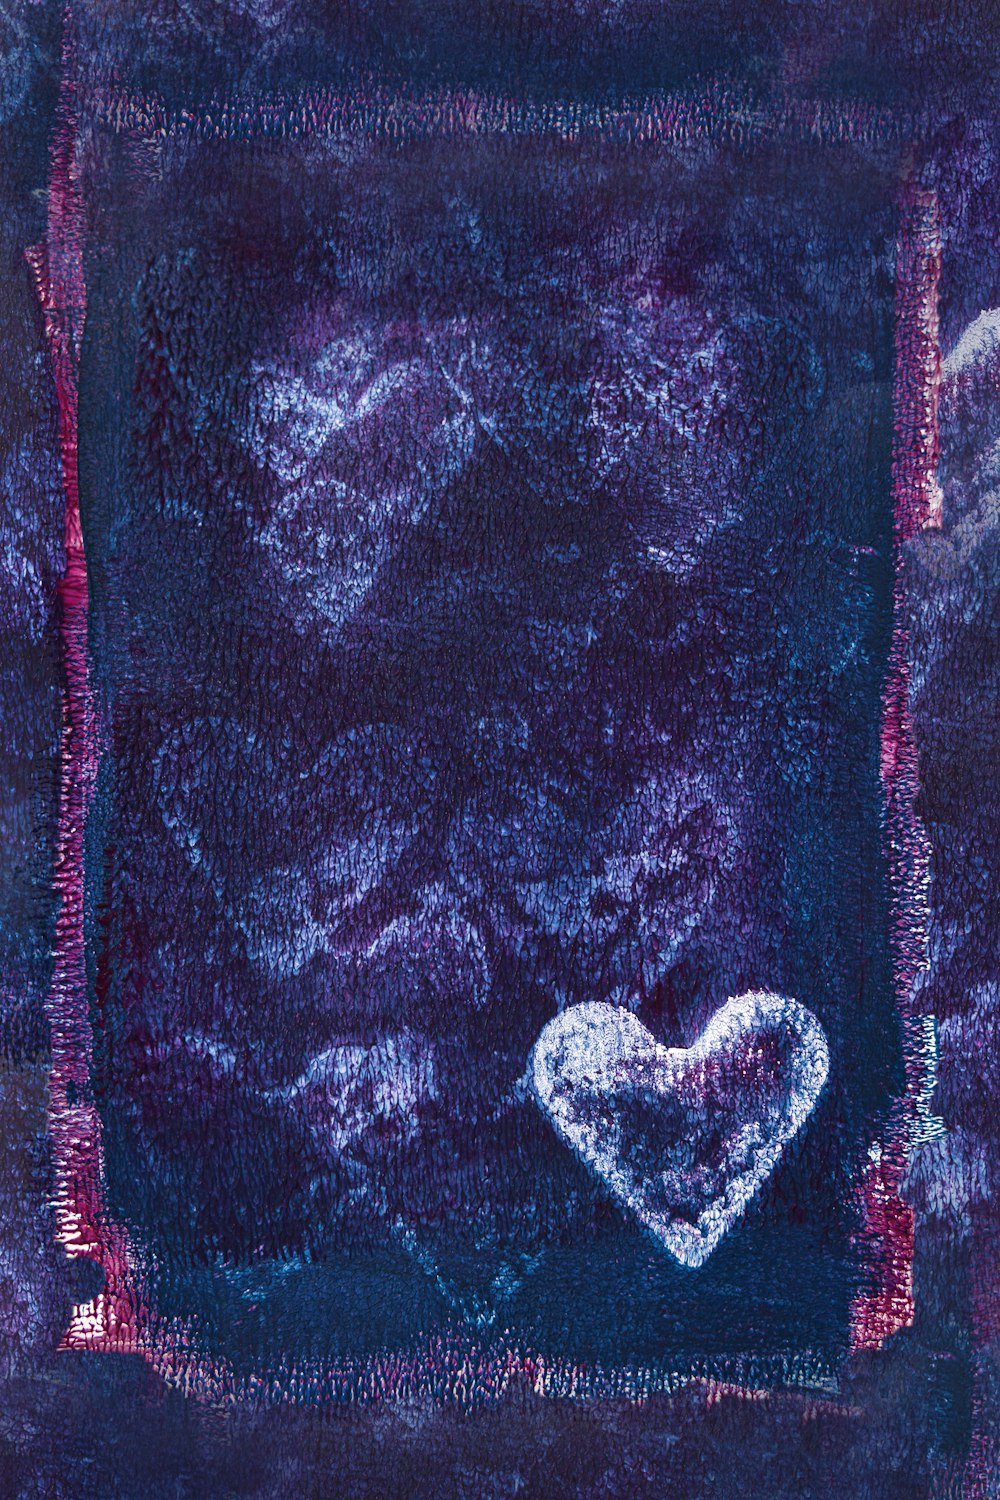 a painting of a heart on a purple background